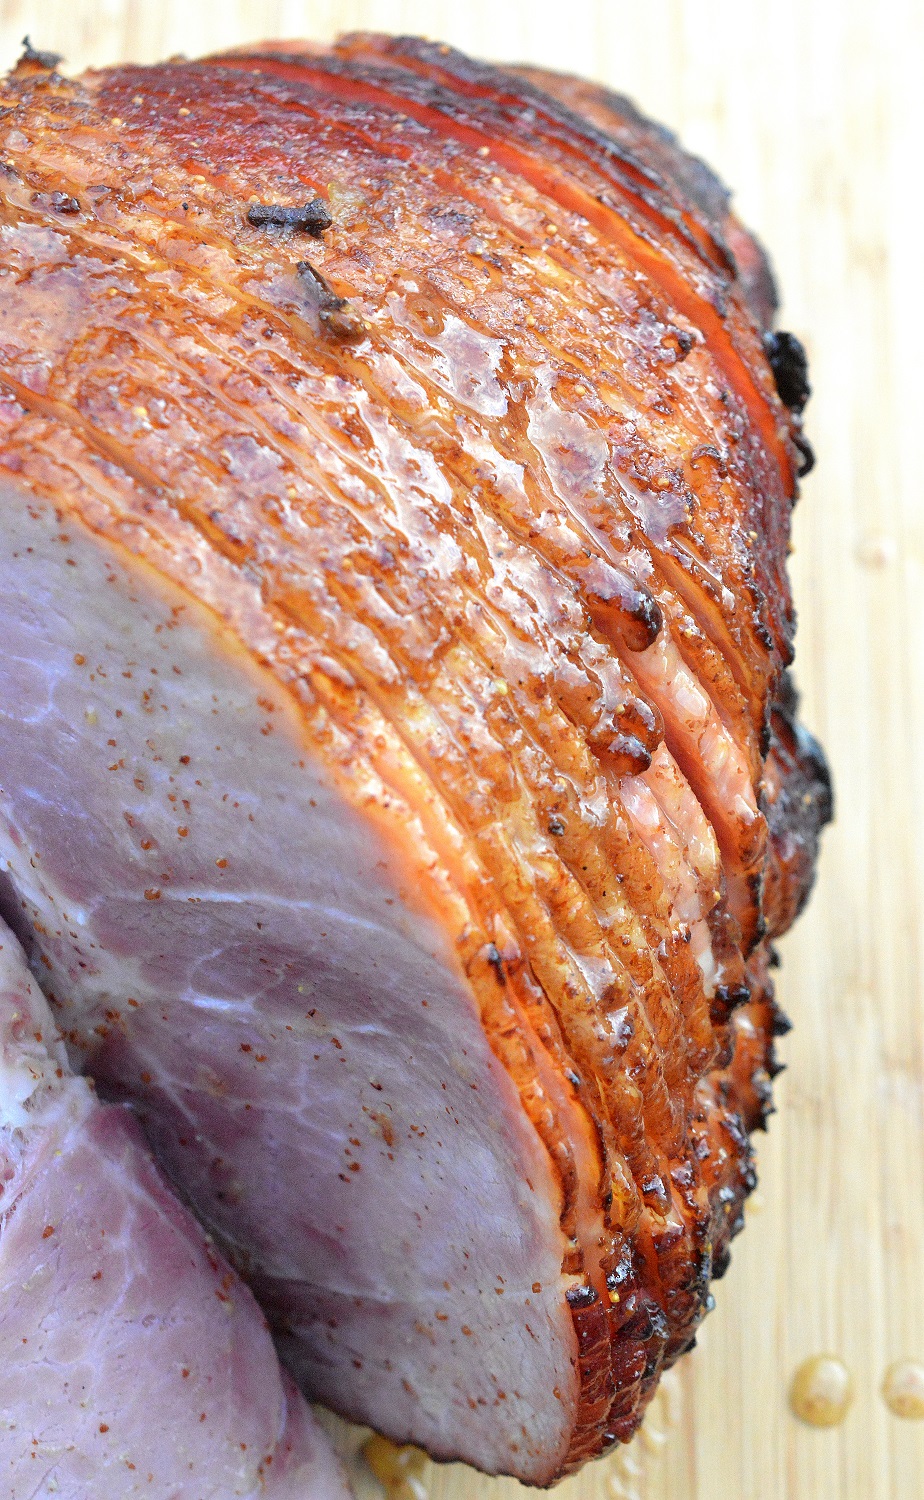 Smithfield Spiral Ham - Cooked on the grill.